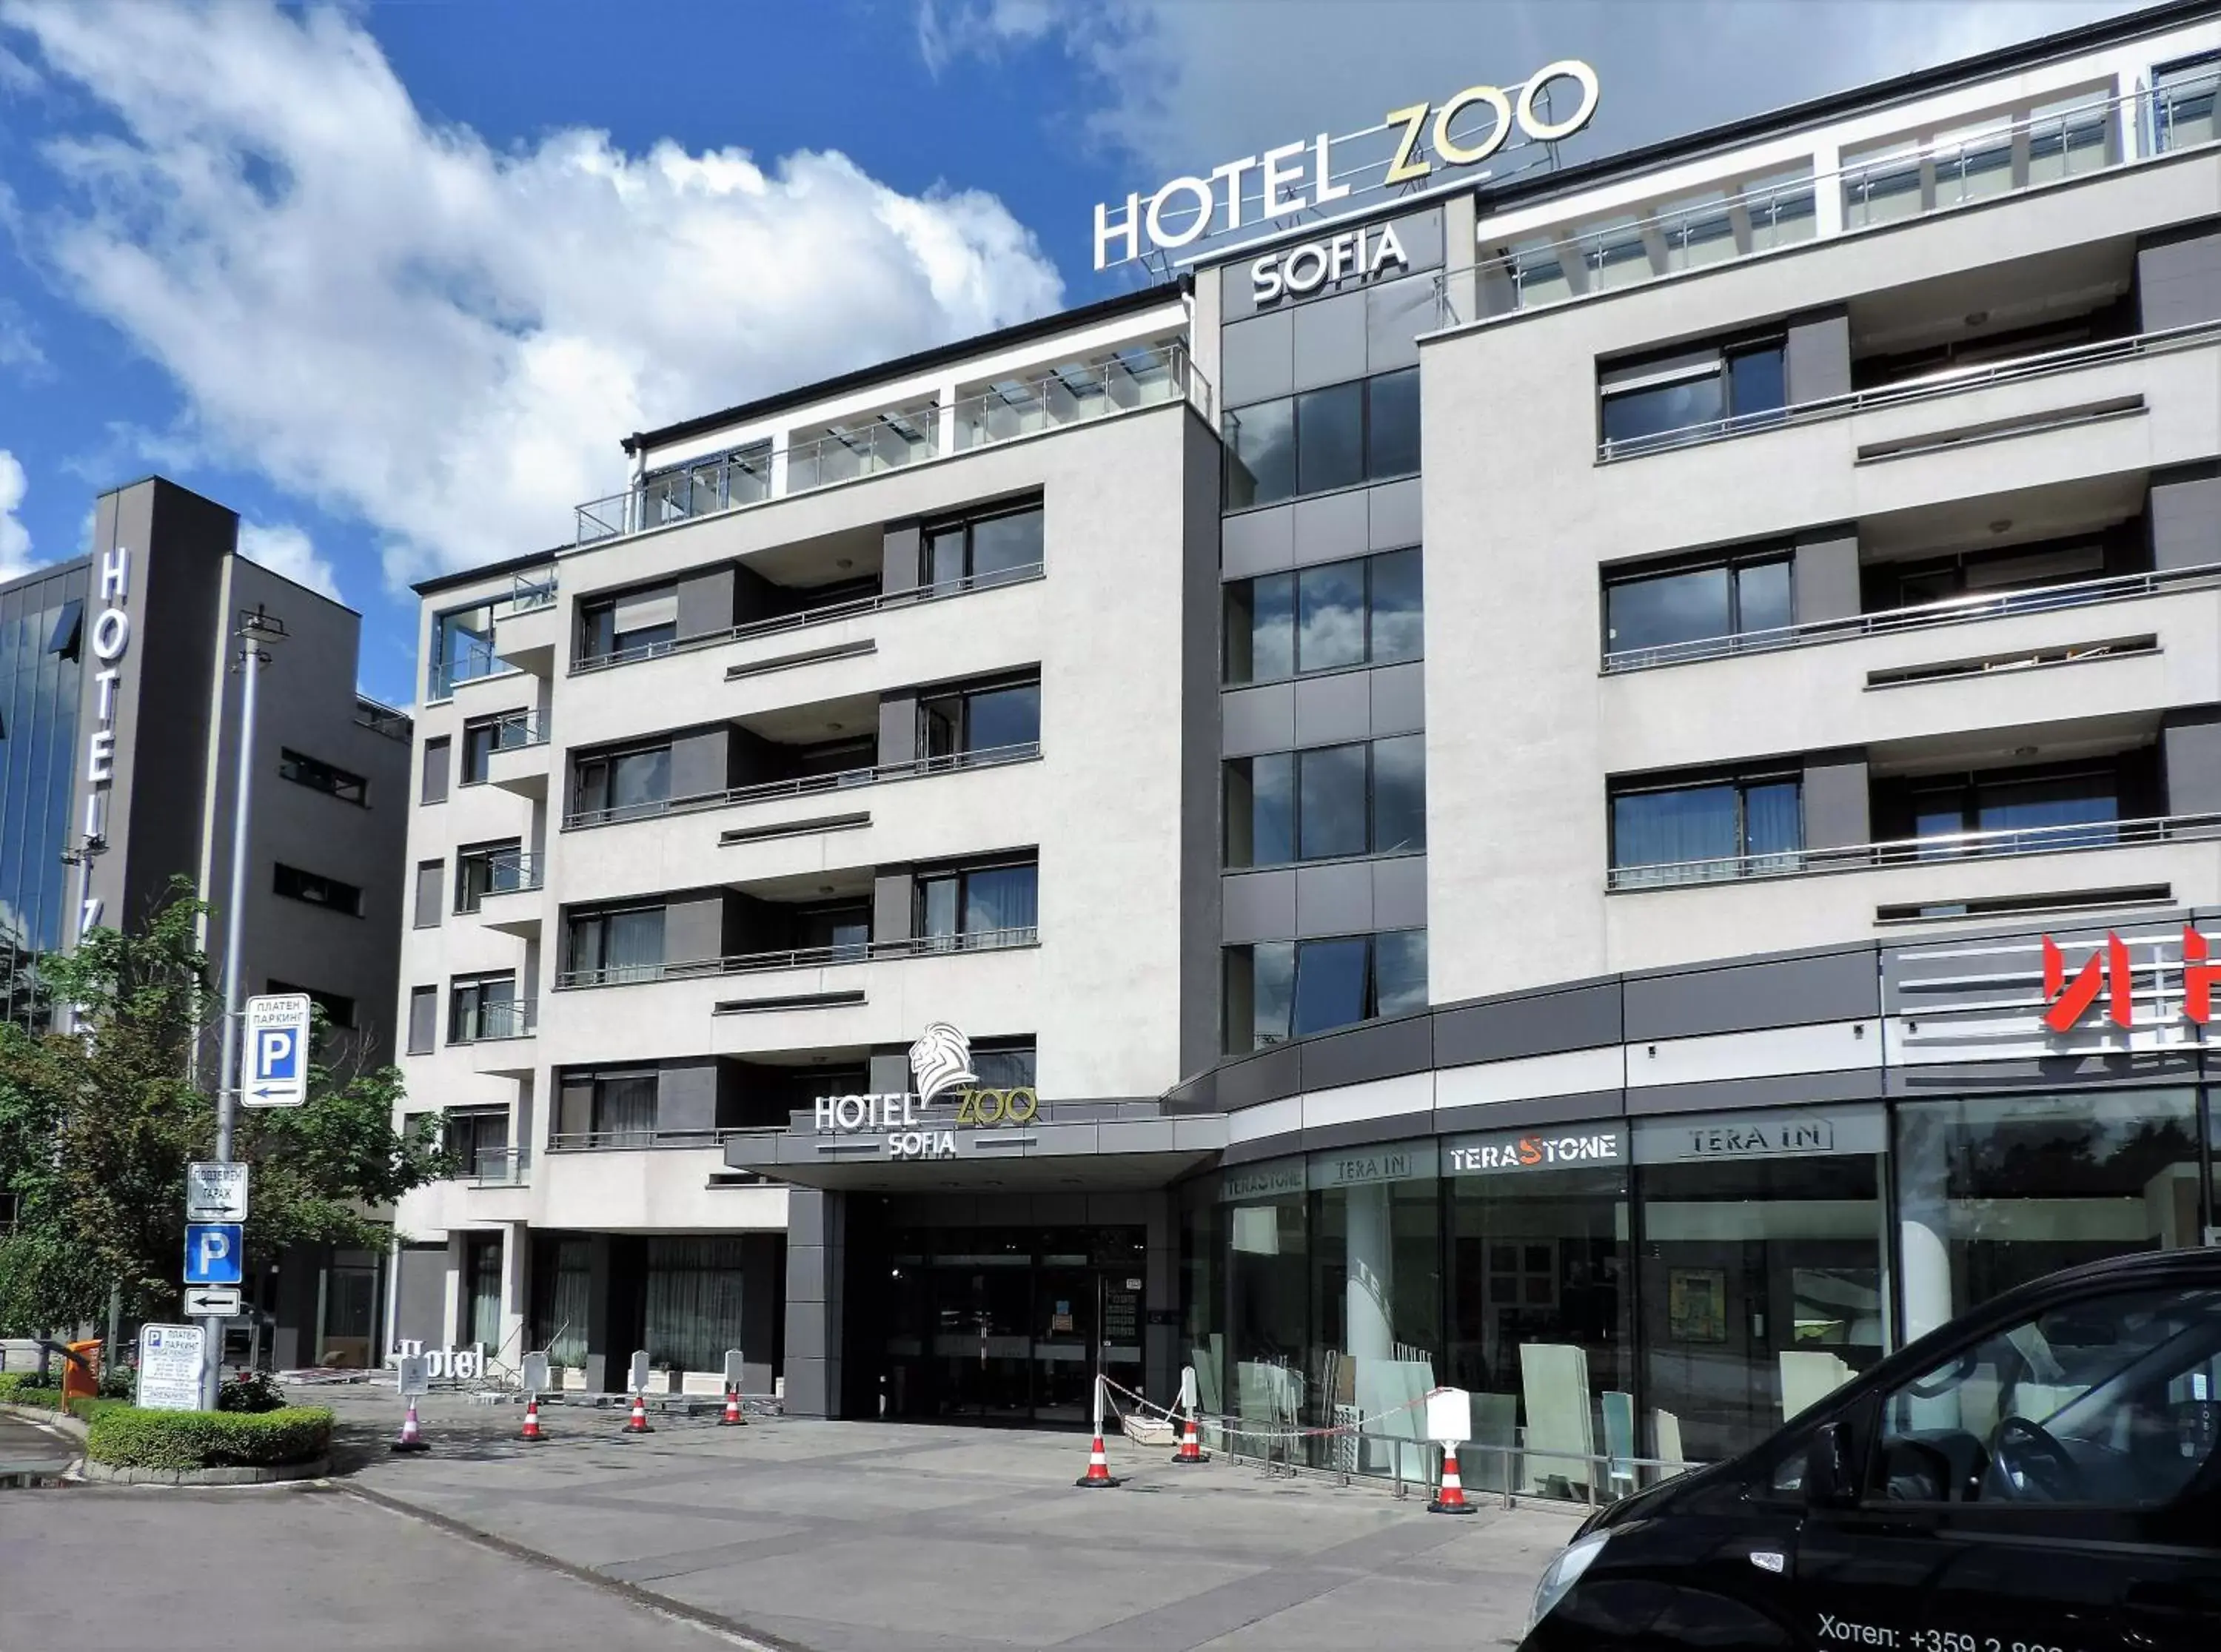 Property Building in Hotel ZOO Sofia - Secured Paid Parking